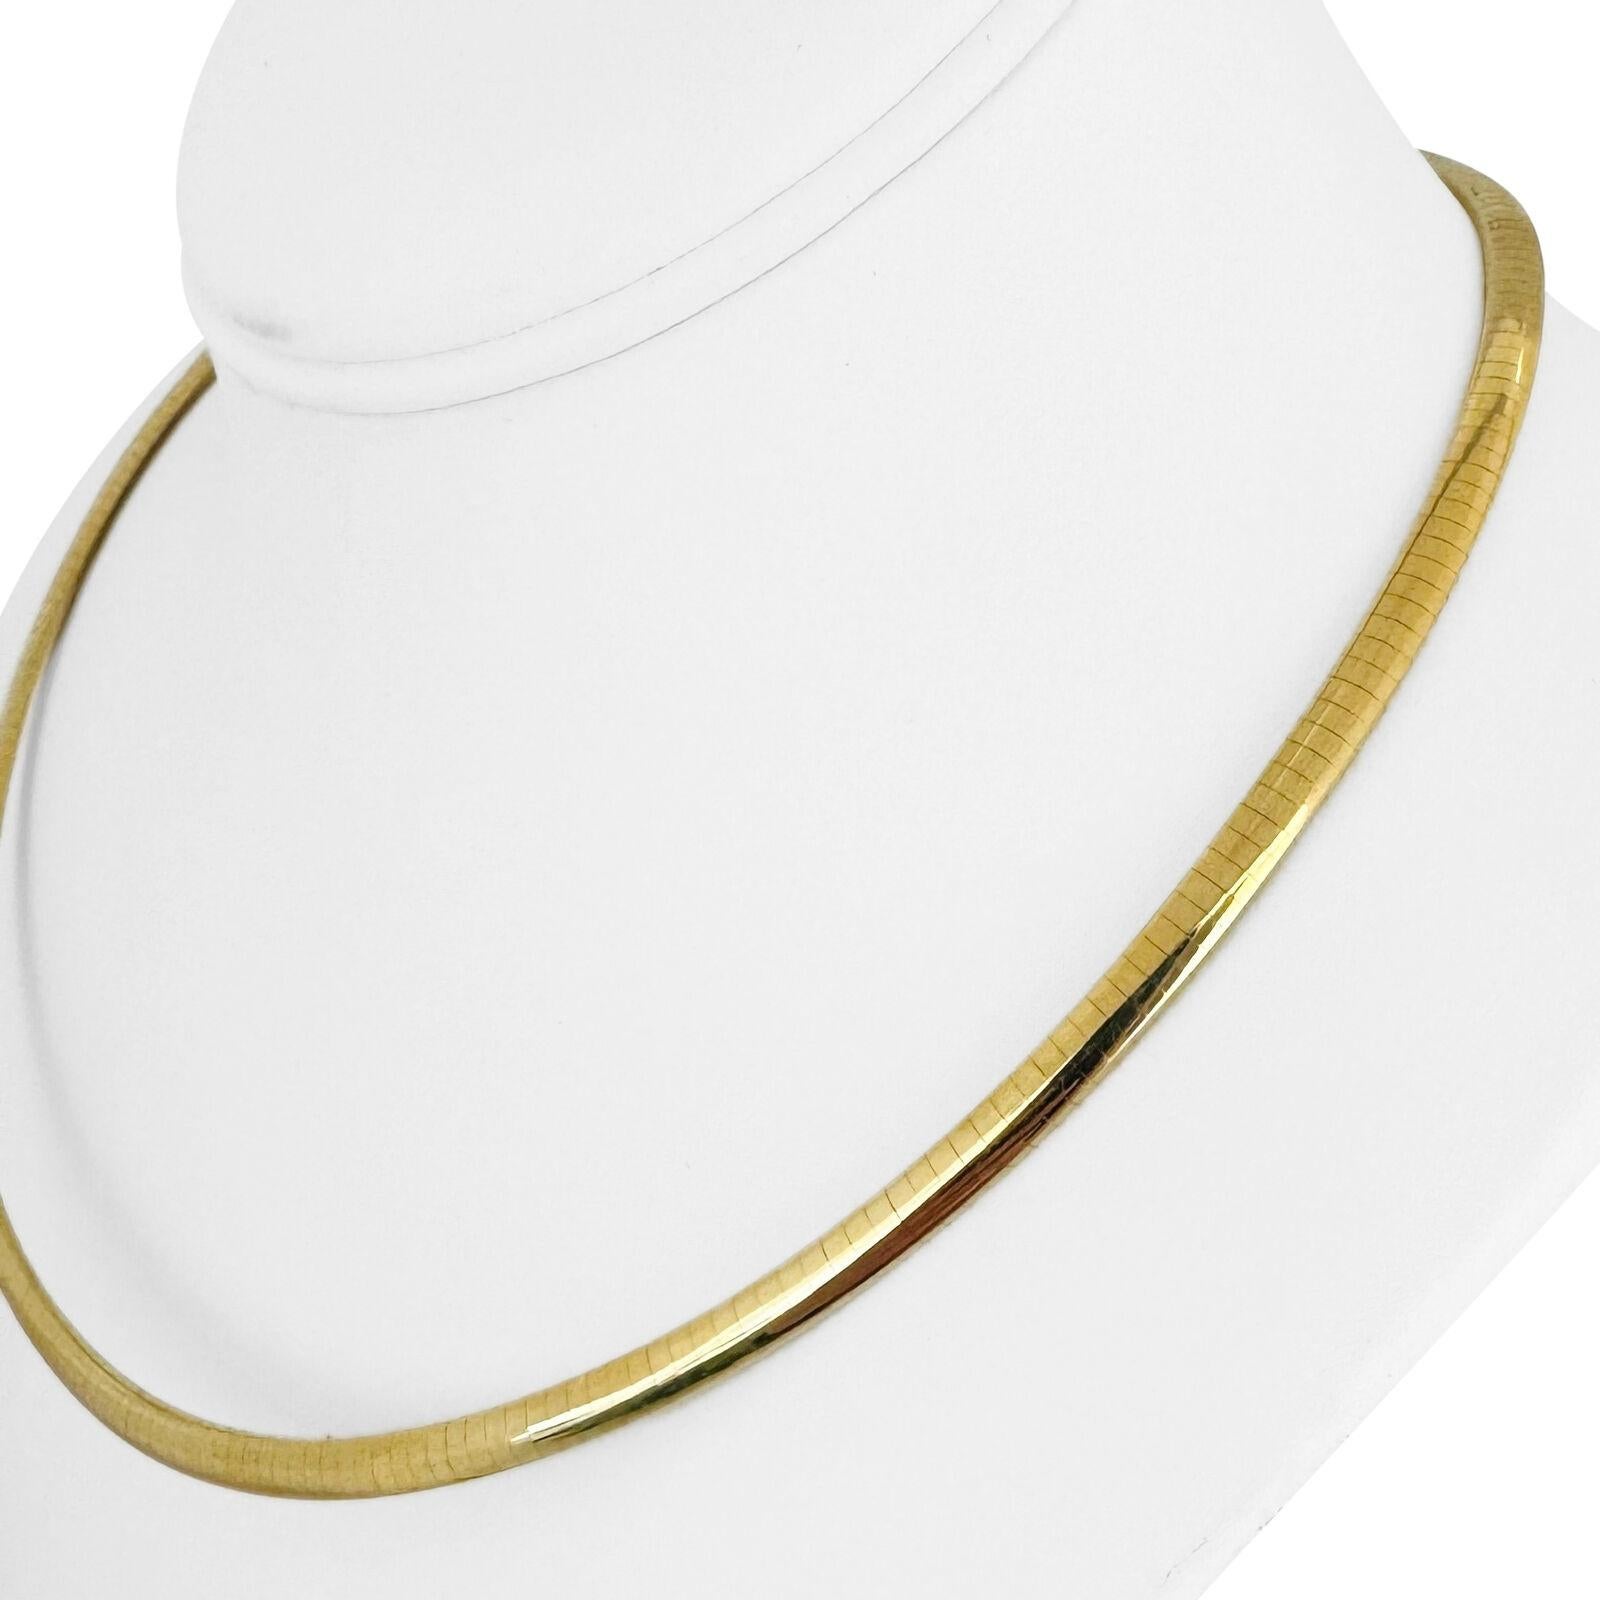 14k Yellow Gold 28.6g Solid 4mm Omega Link Necklace Italy 18